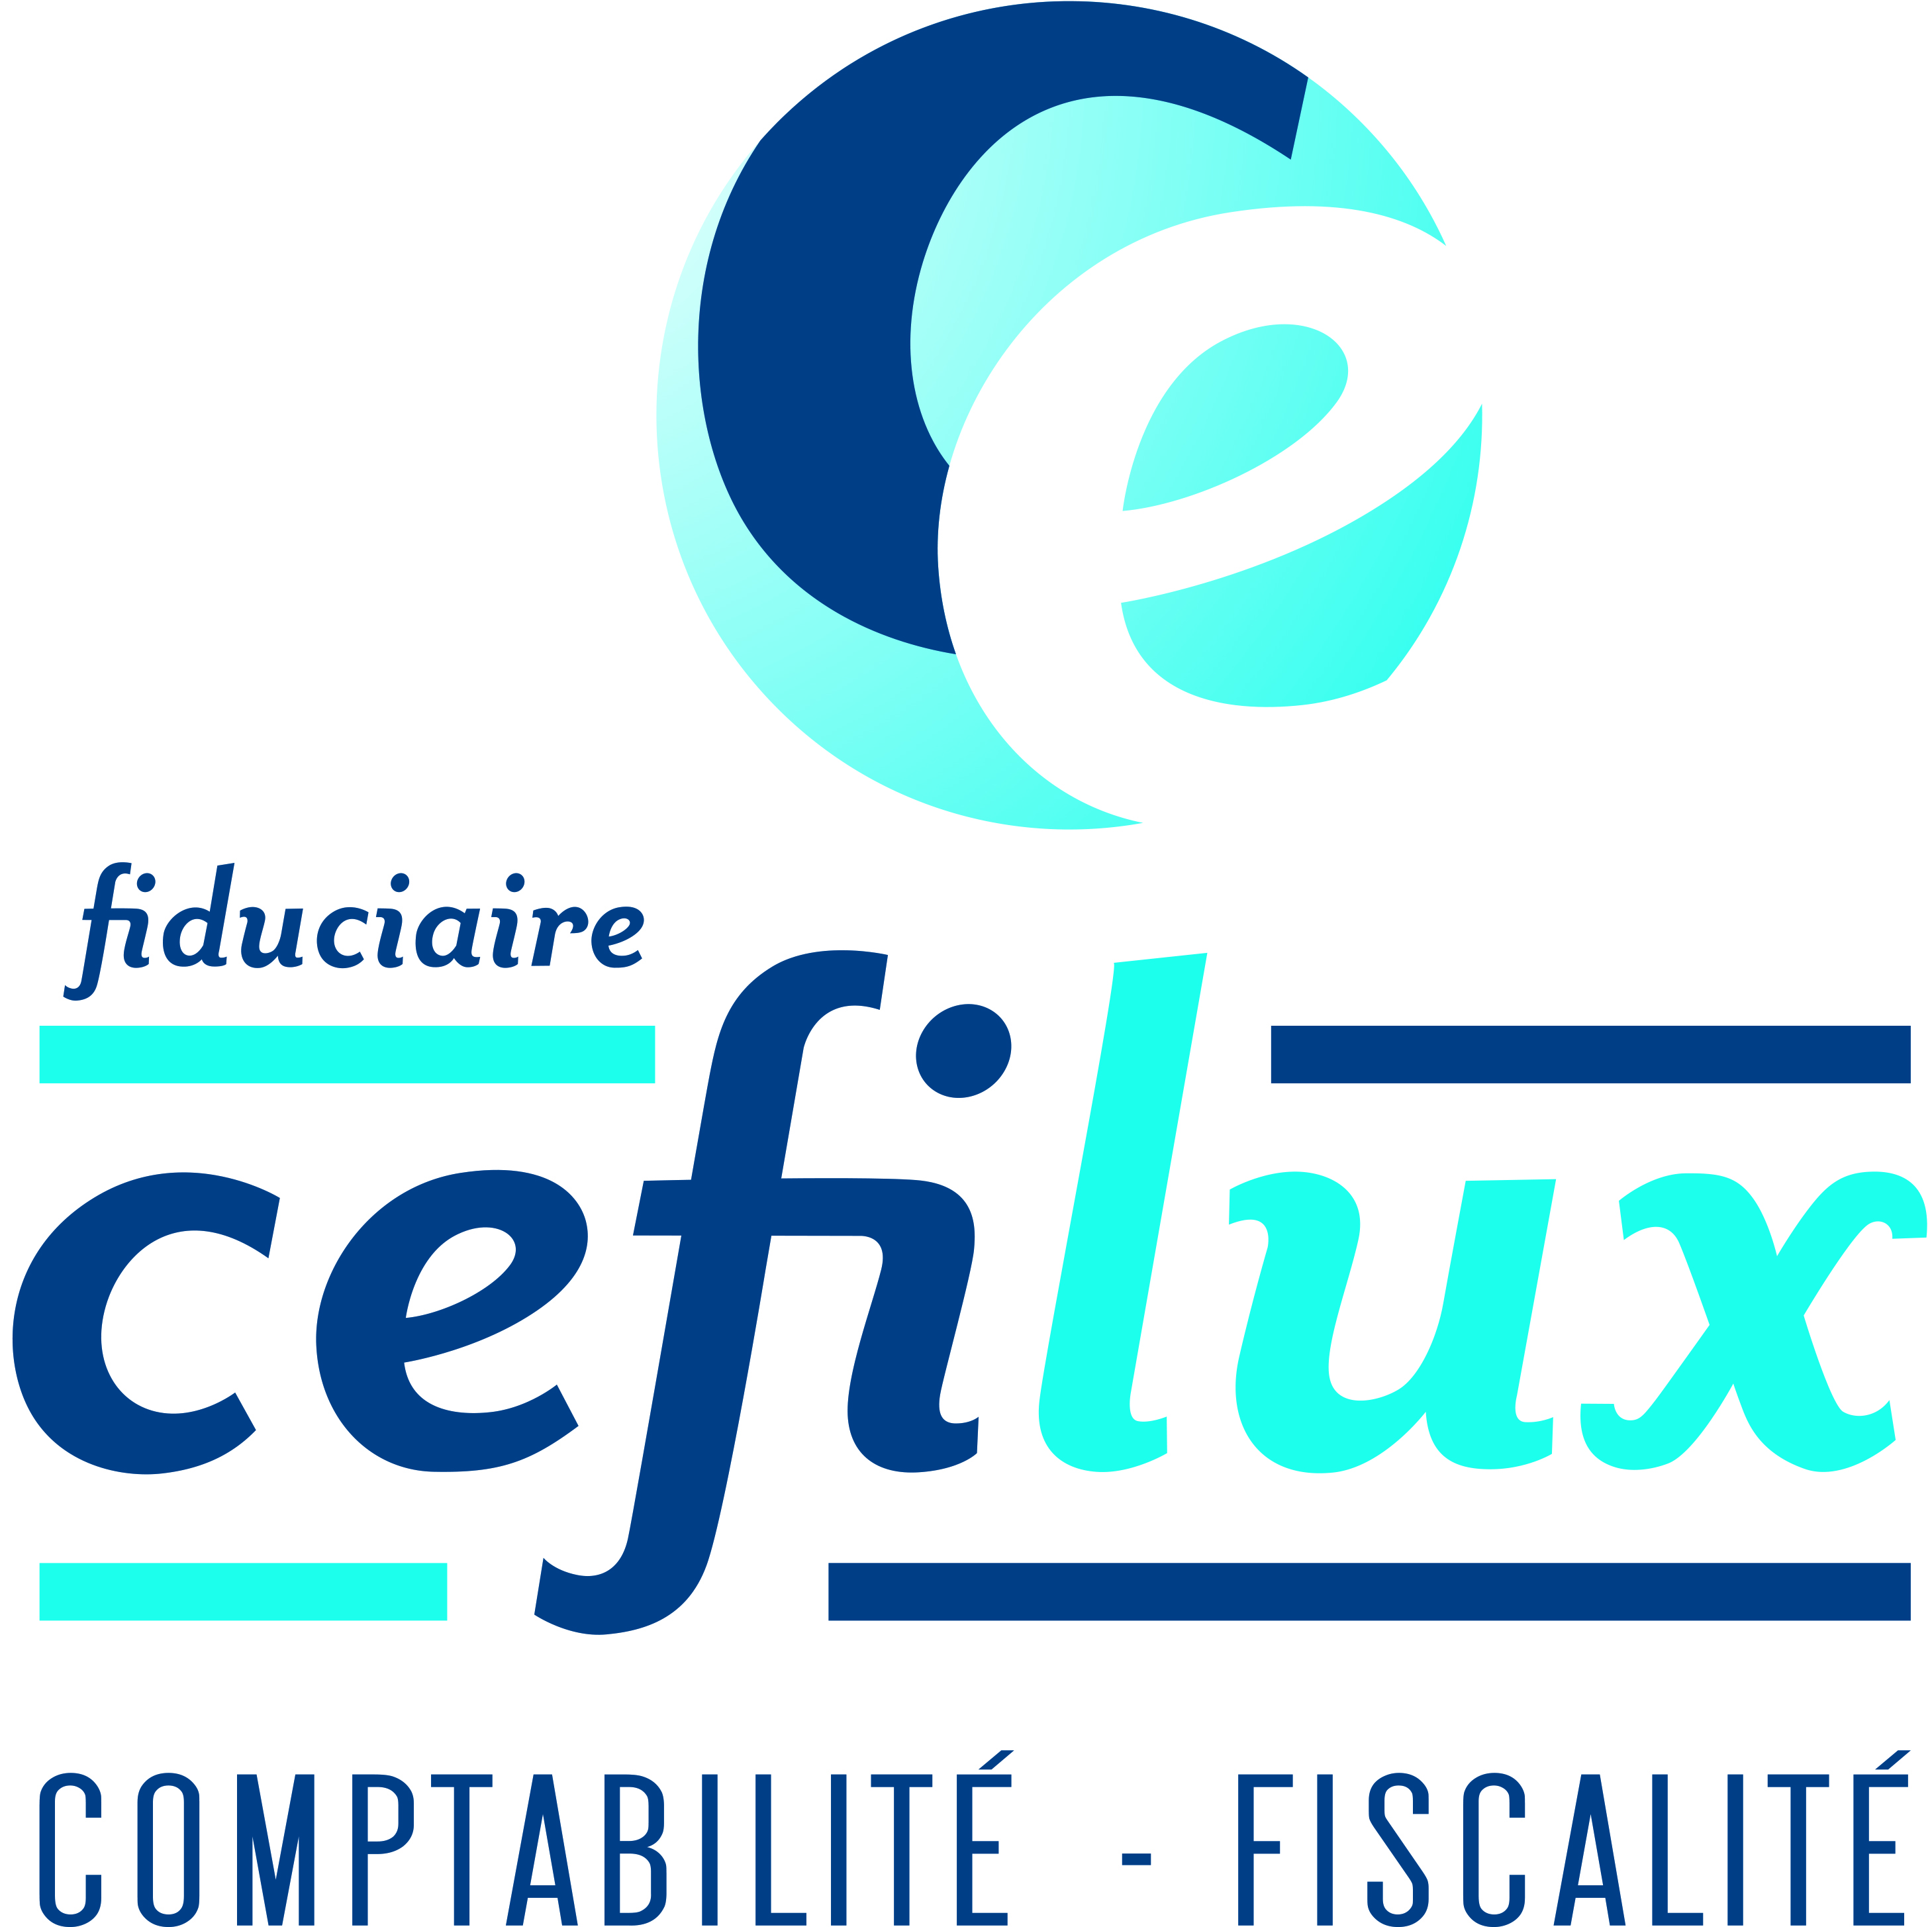 Fiduciaire Cefilux